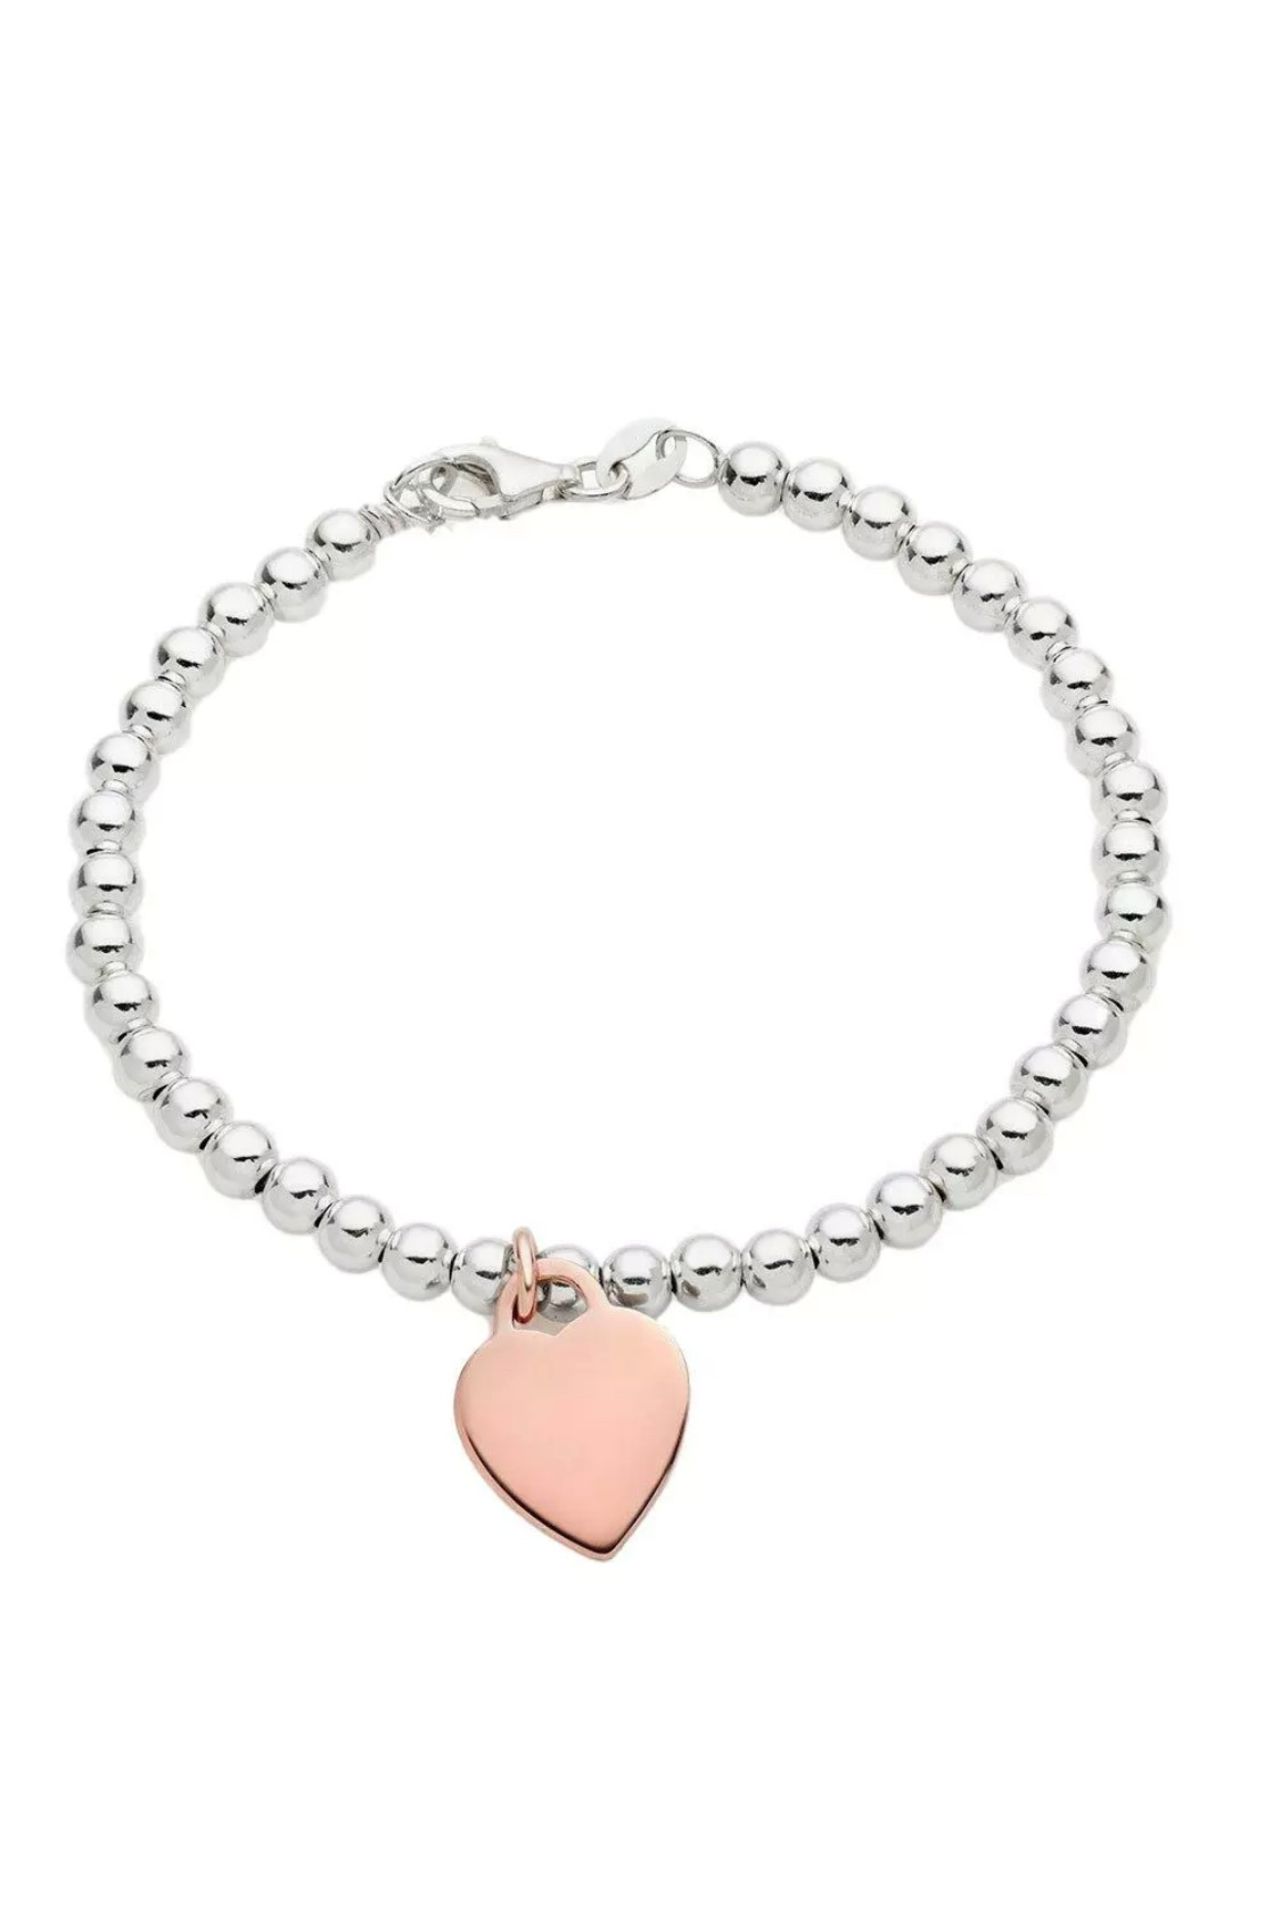 925 Silver Bracelet with Rose gold plated Heart pendant, new, RRP £65 at Beaverbrooks.